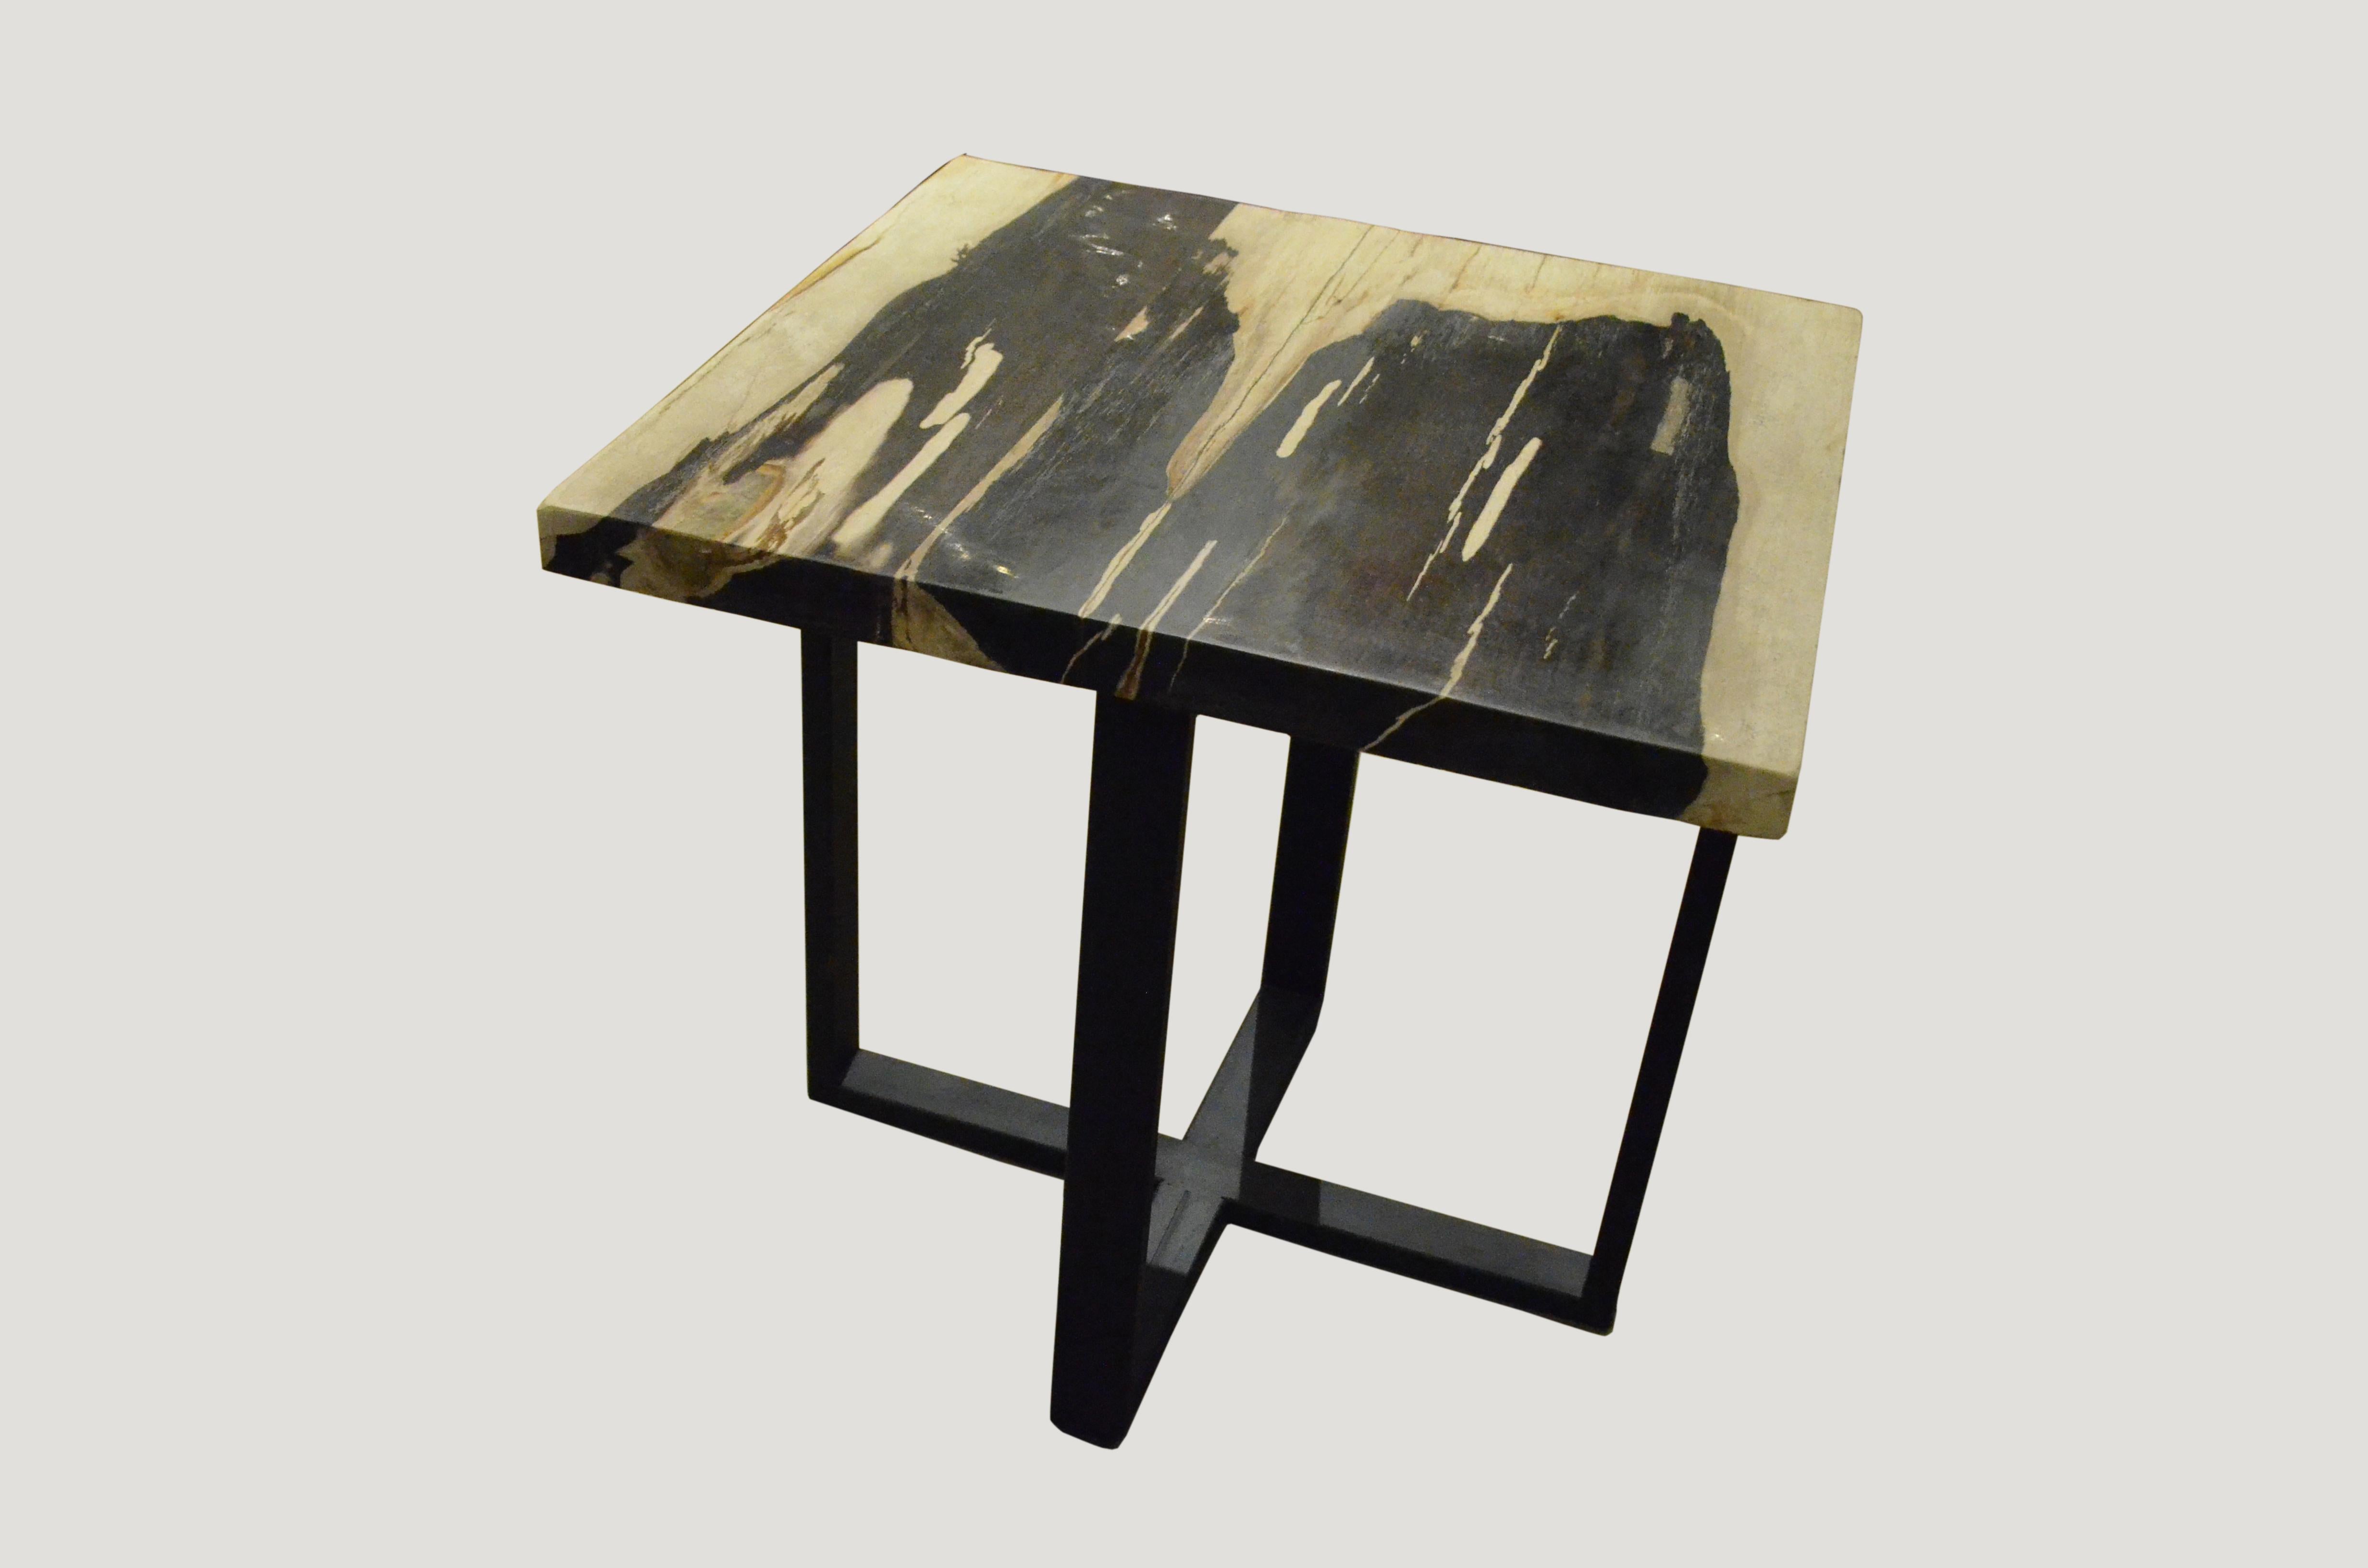 Andrianna Shamaris Petrified Wood Slab Top Side Table In Excellent Condition For Sale In New York, NY